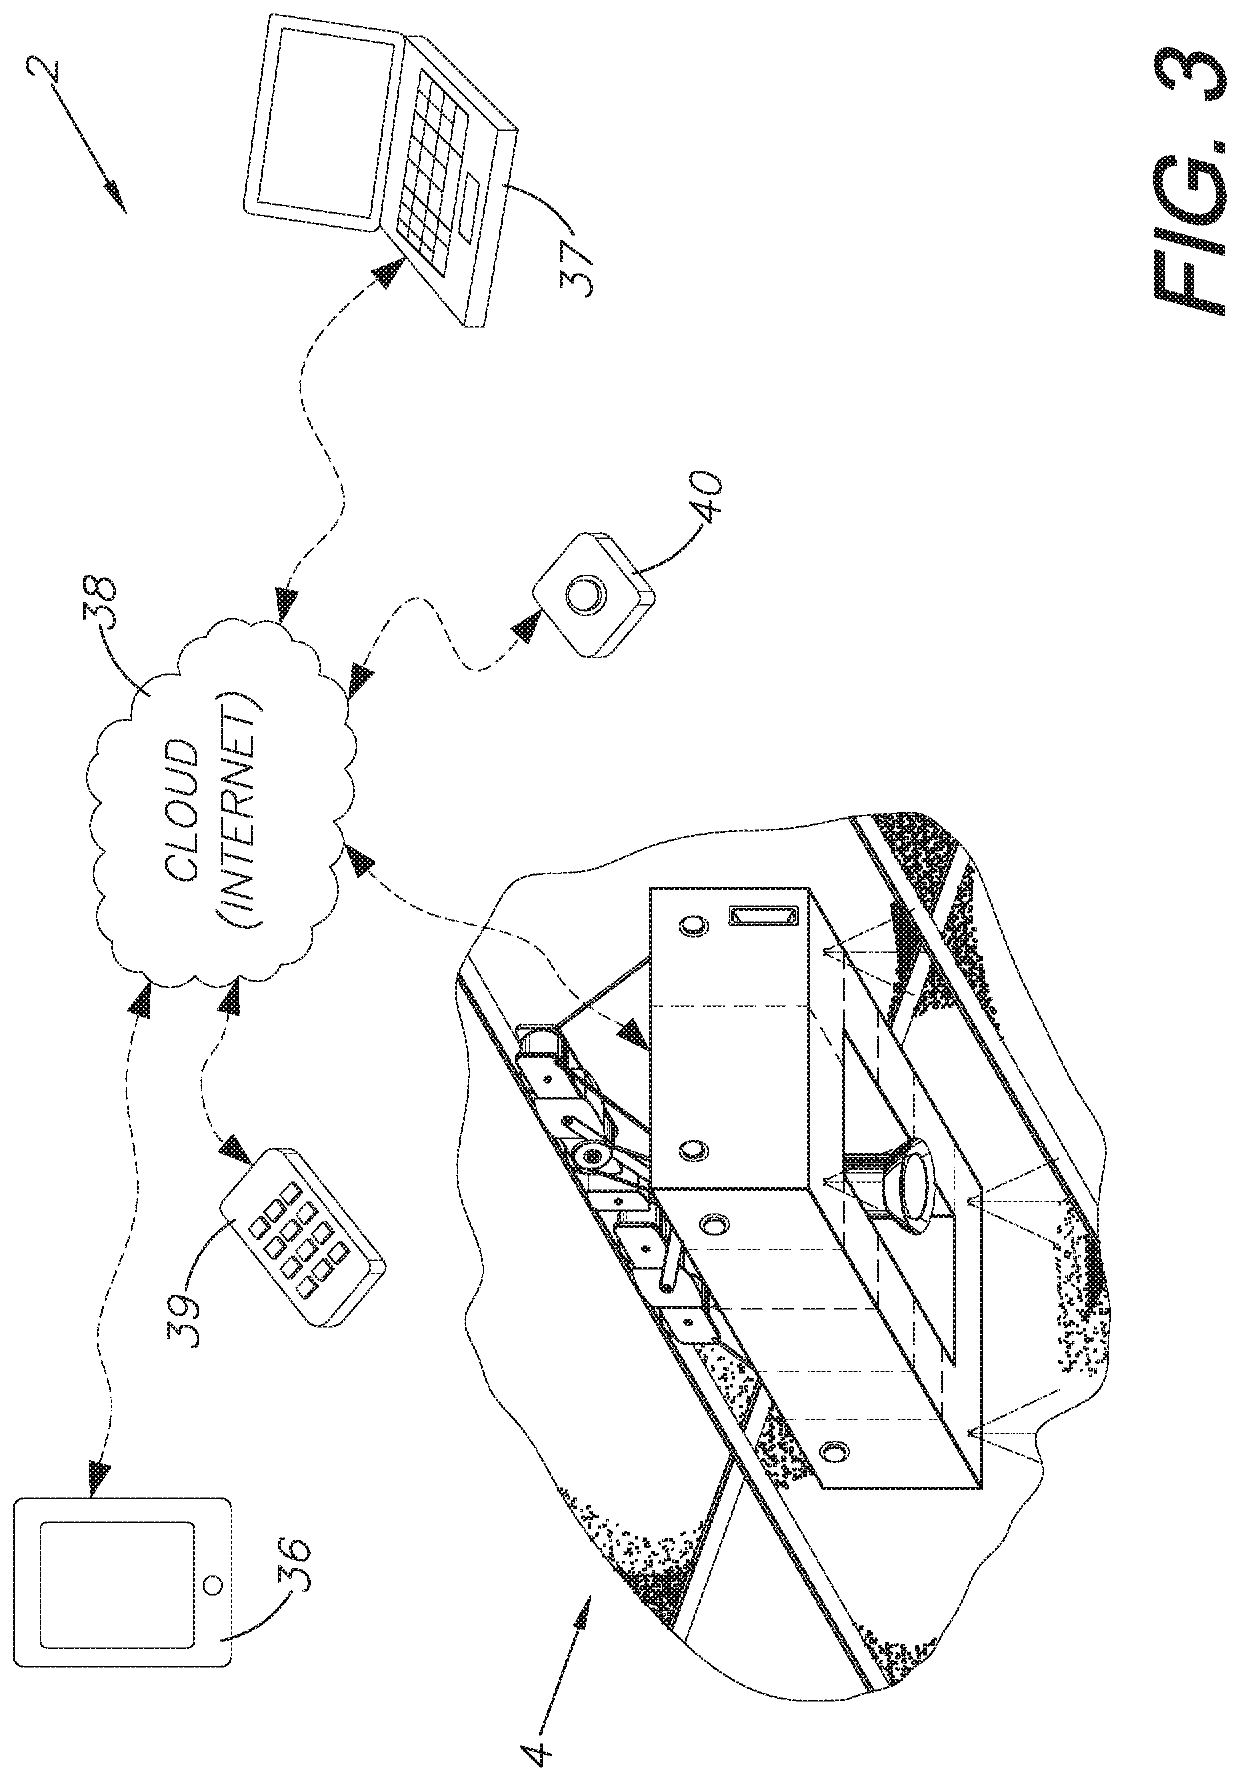 Remotely-controlled magnetic surveillance and attack prevention system and method